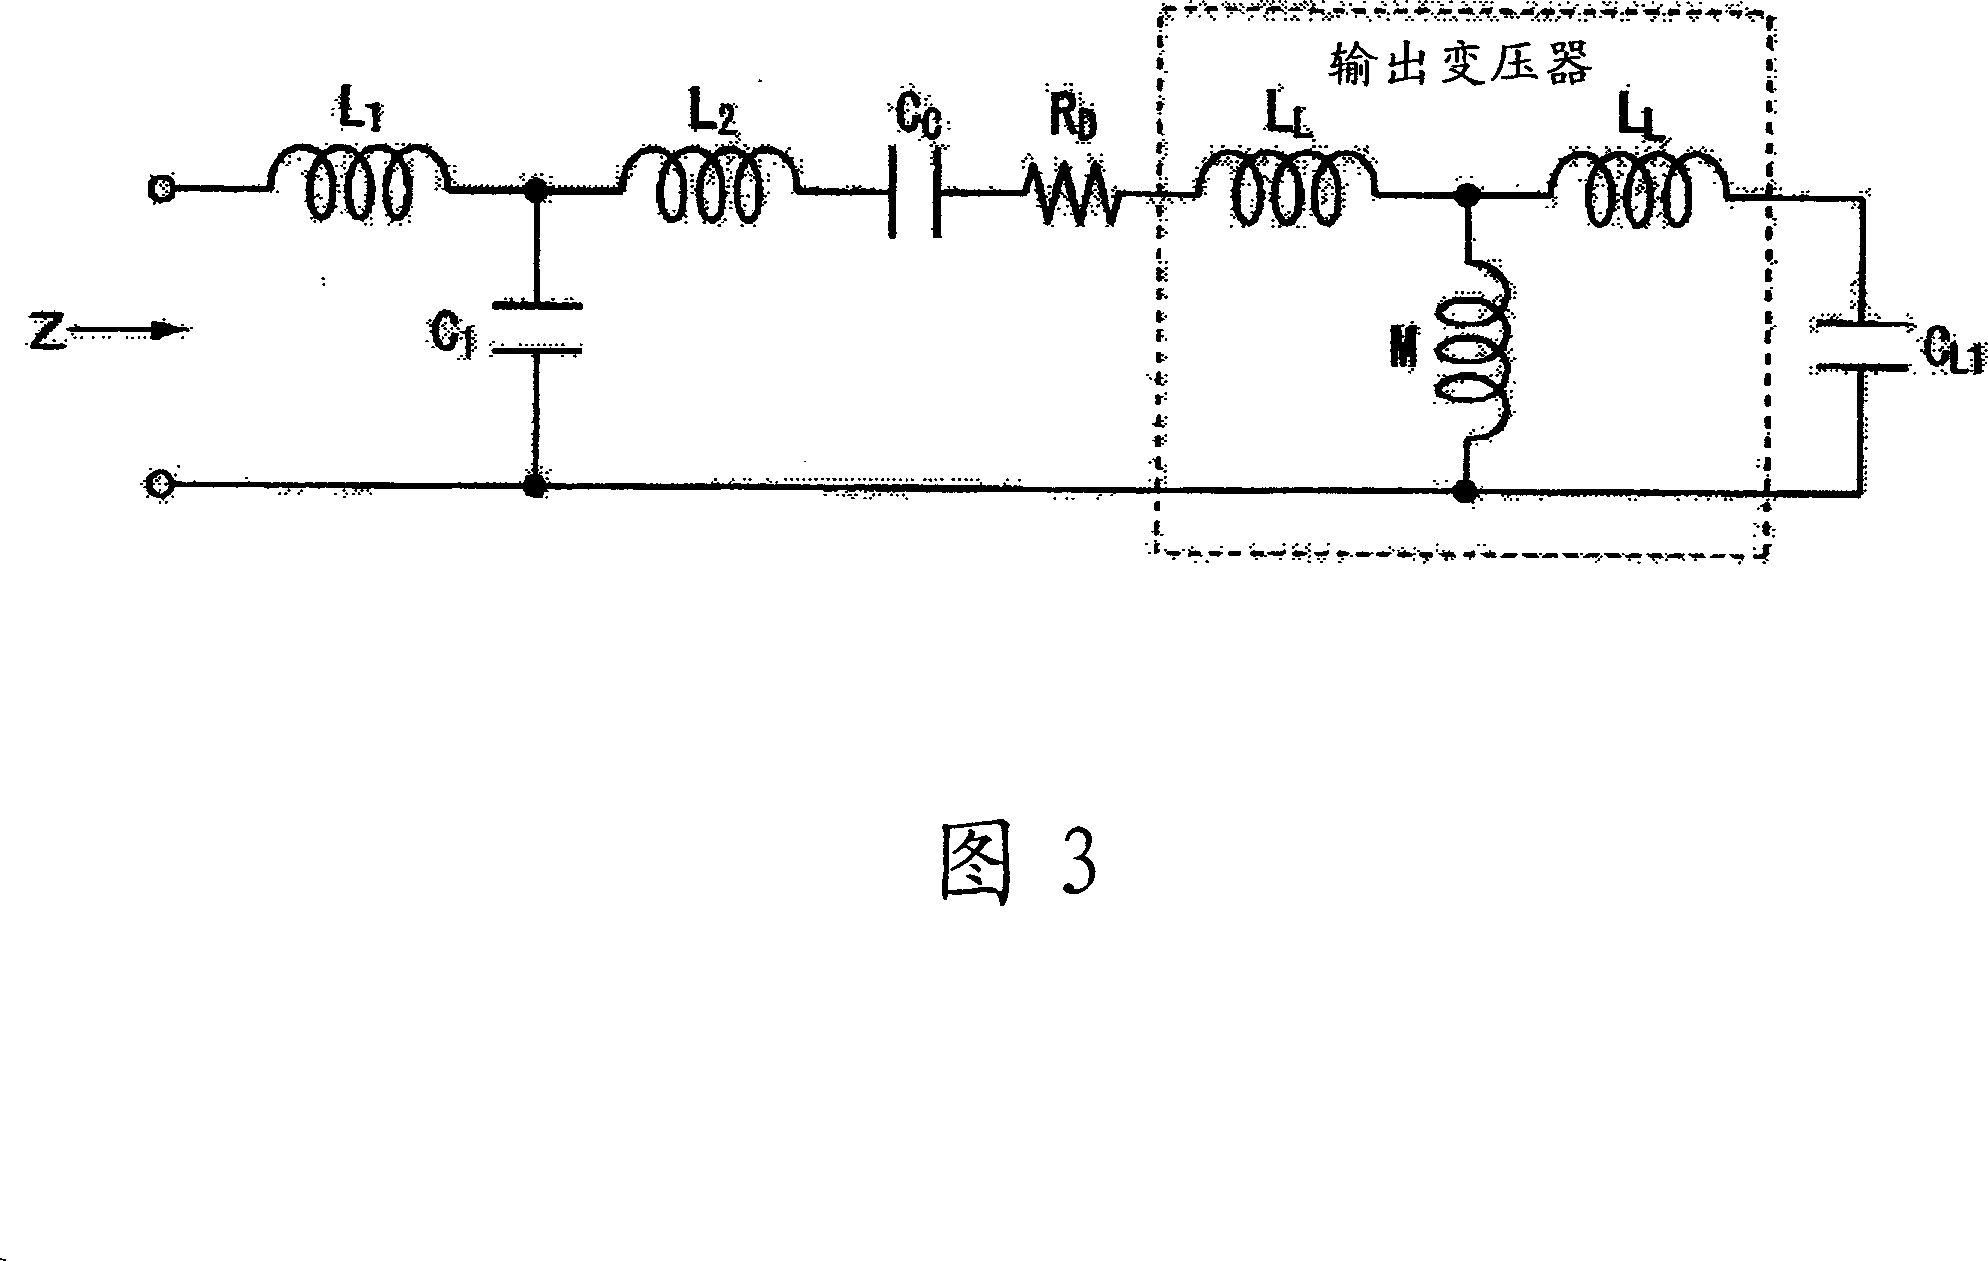 Electrostatic transducer, ultrasonic speaker, driving circuit of capacitive load